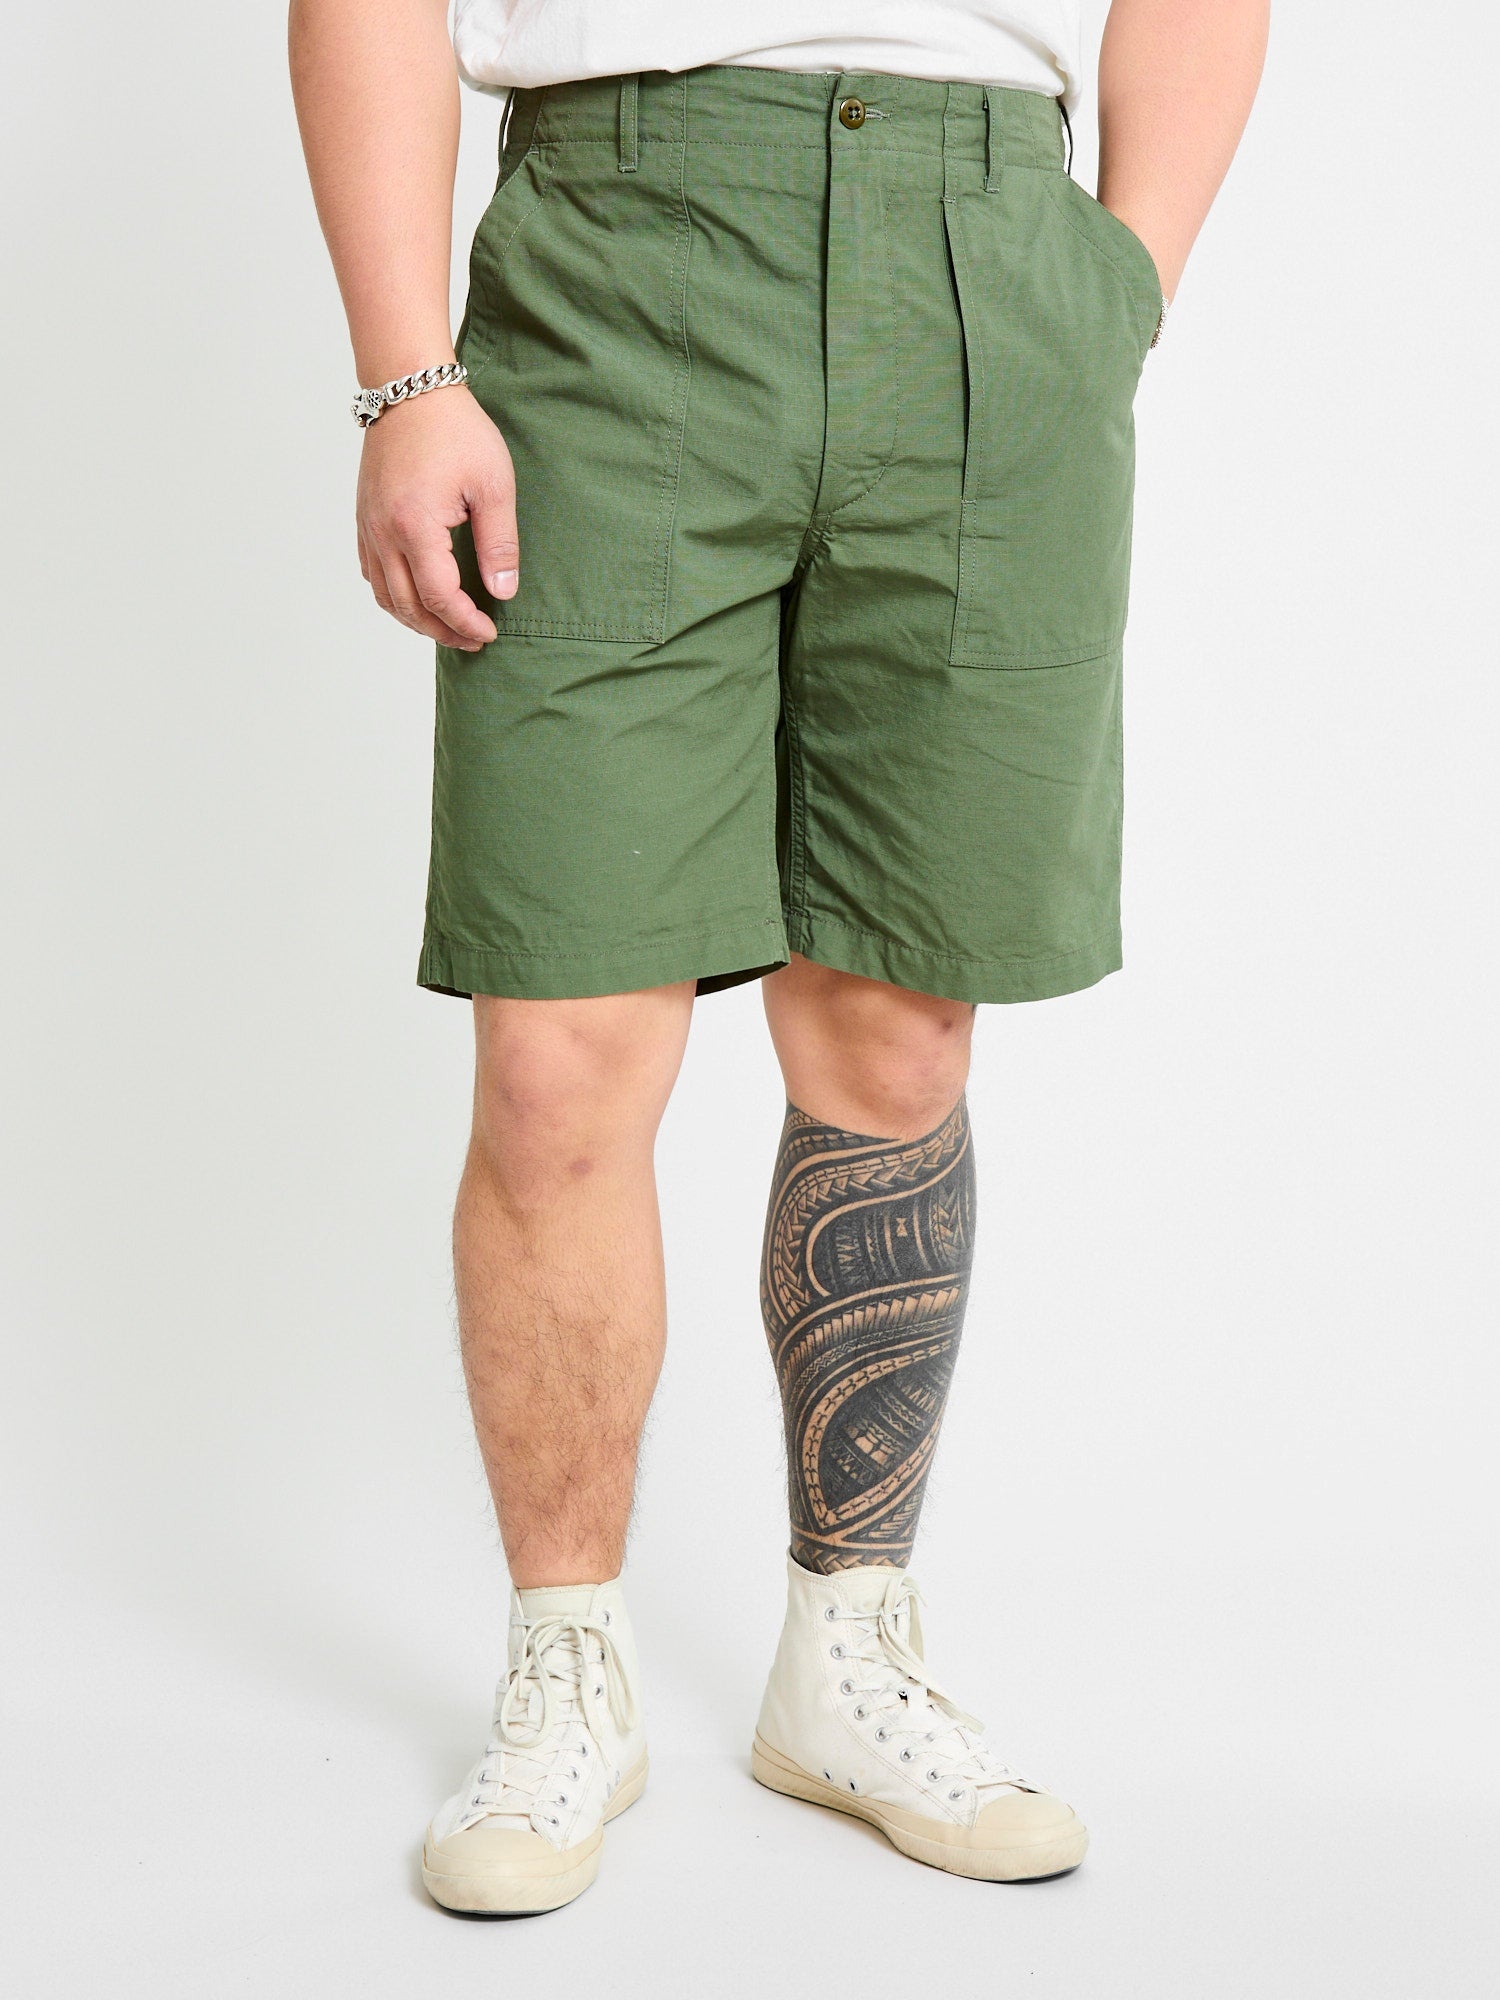 Fatigue Shorts in Olive Cotton Ripstop - 2